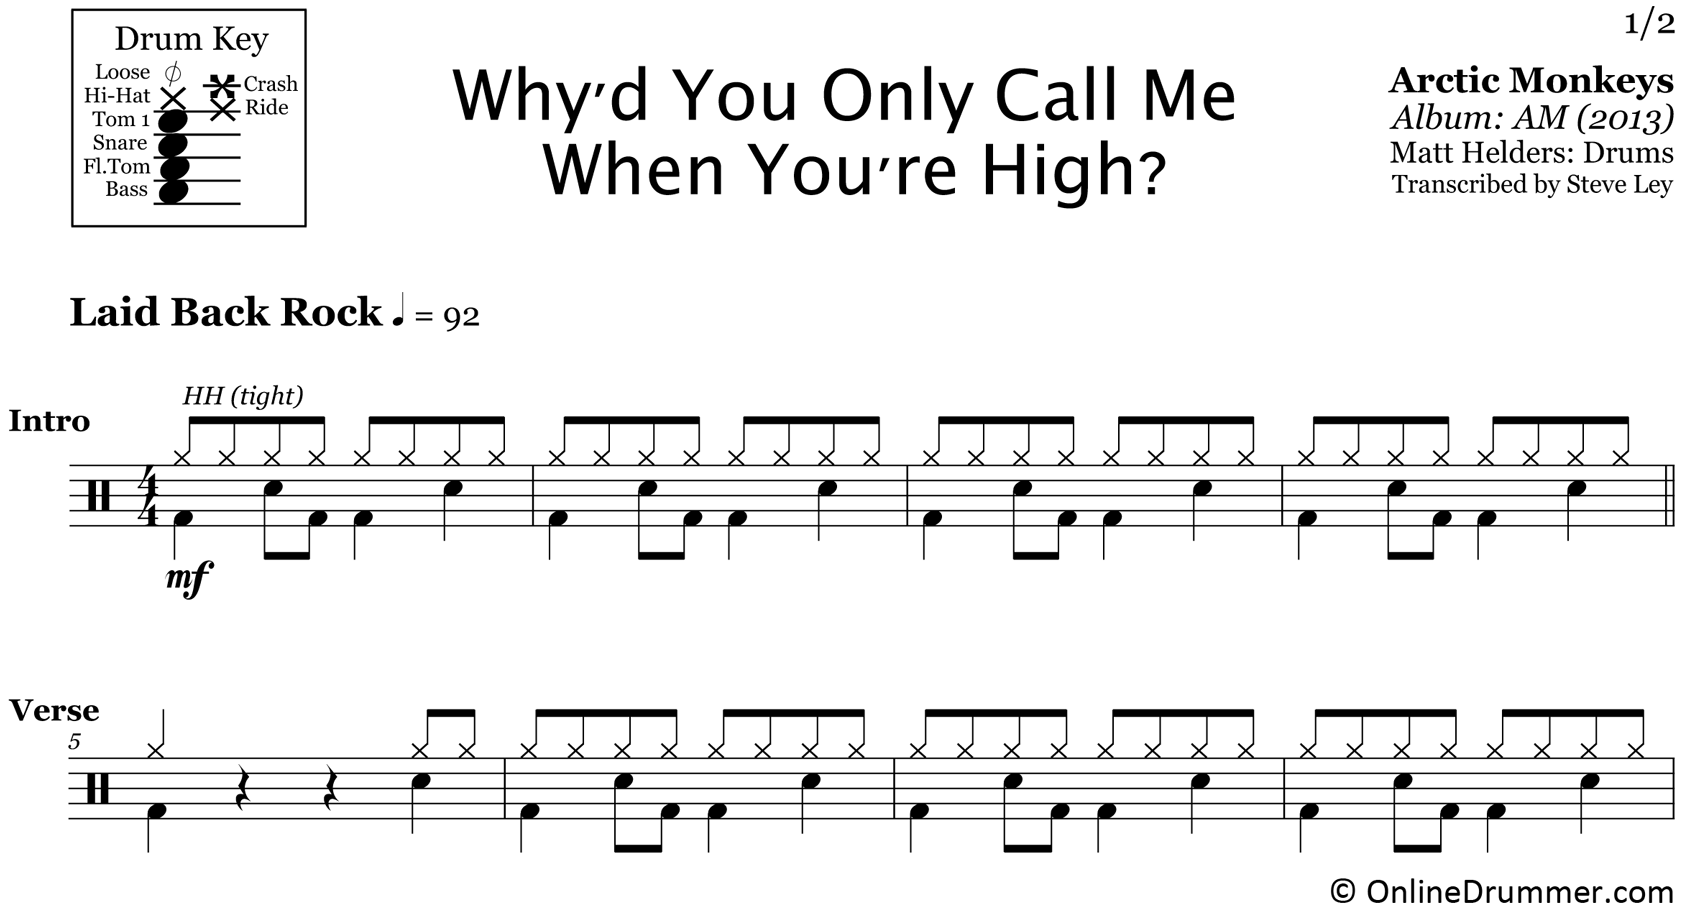 Why'd You Only Call Me When You're High? - Arctic Monkeys - Drum Sheet Music